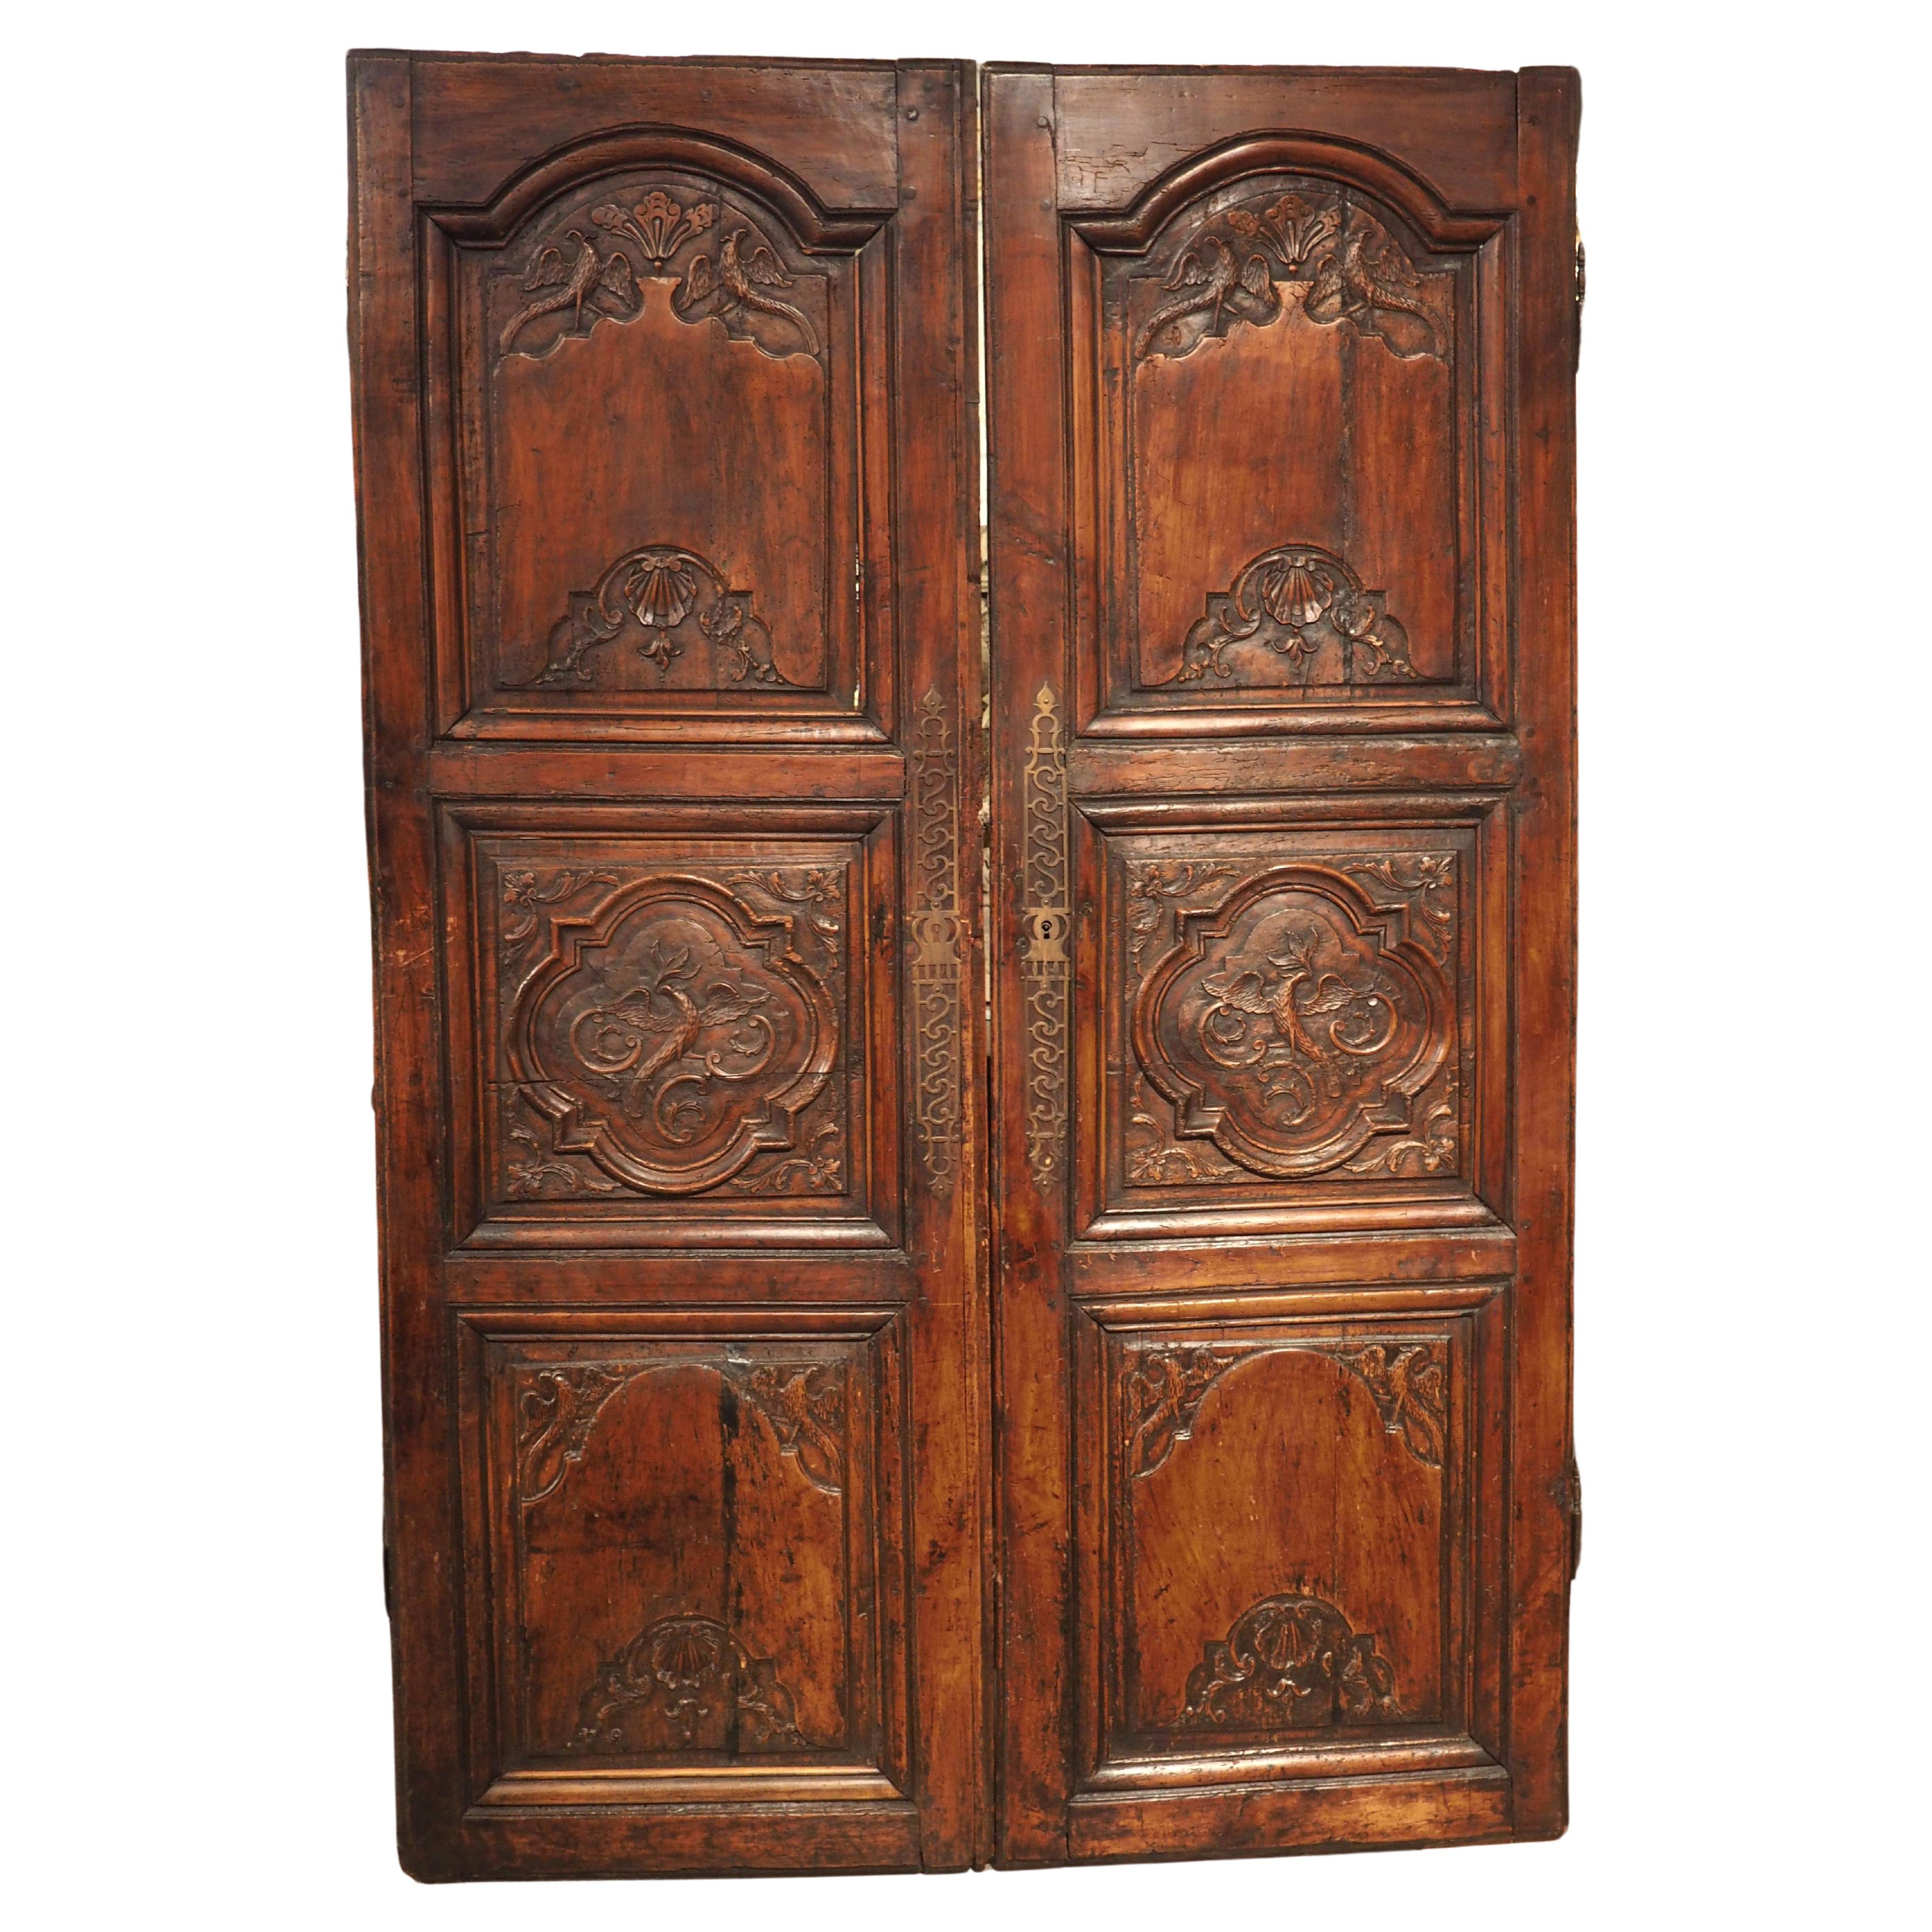 Pair of Antique Cherry Wood Armoire Doors from Rennes, France, Circa 1720